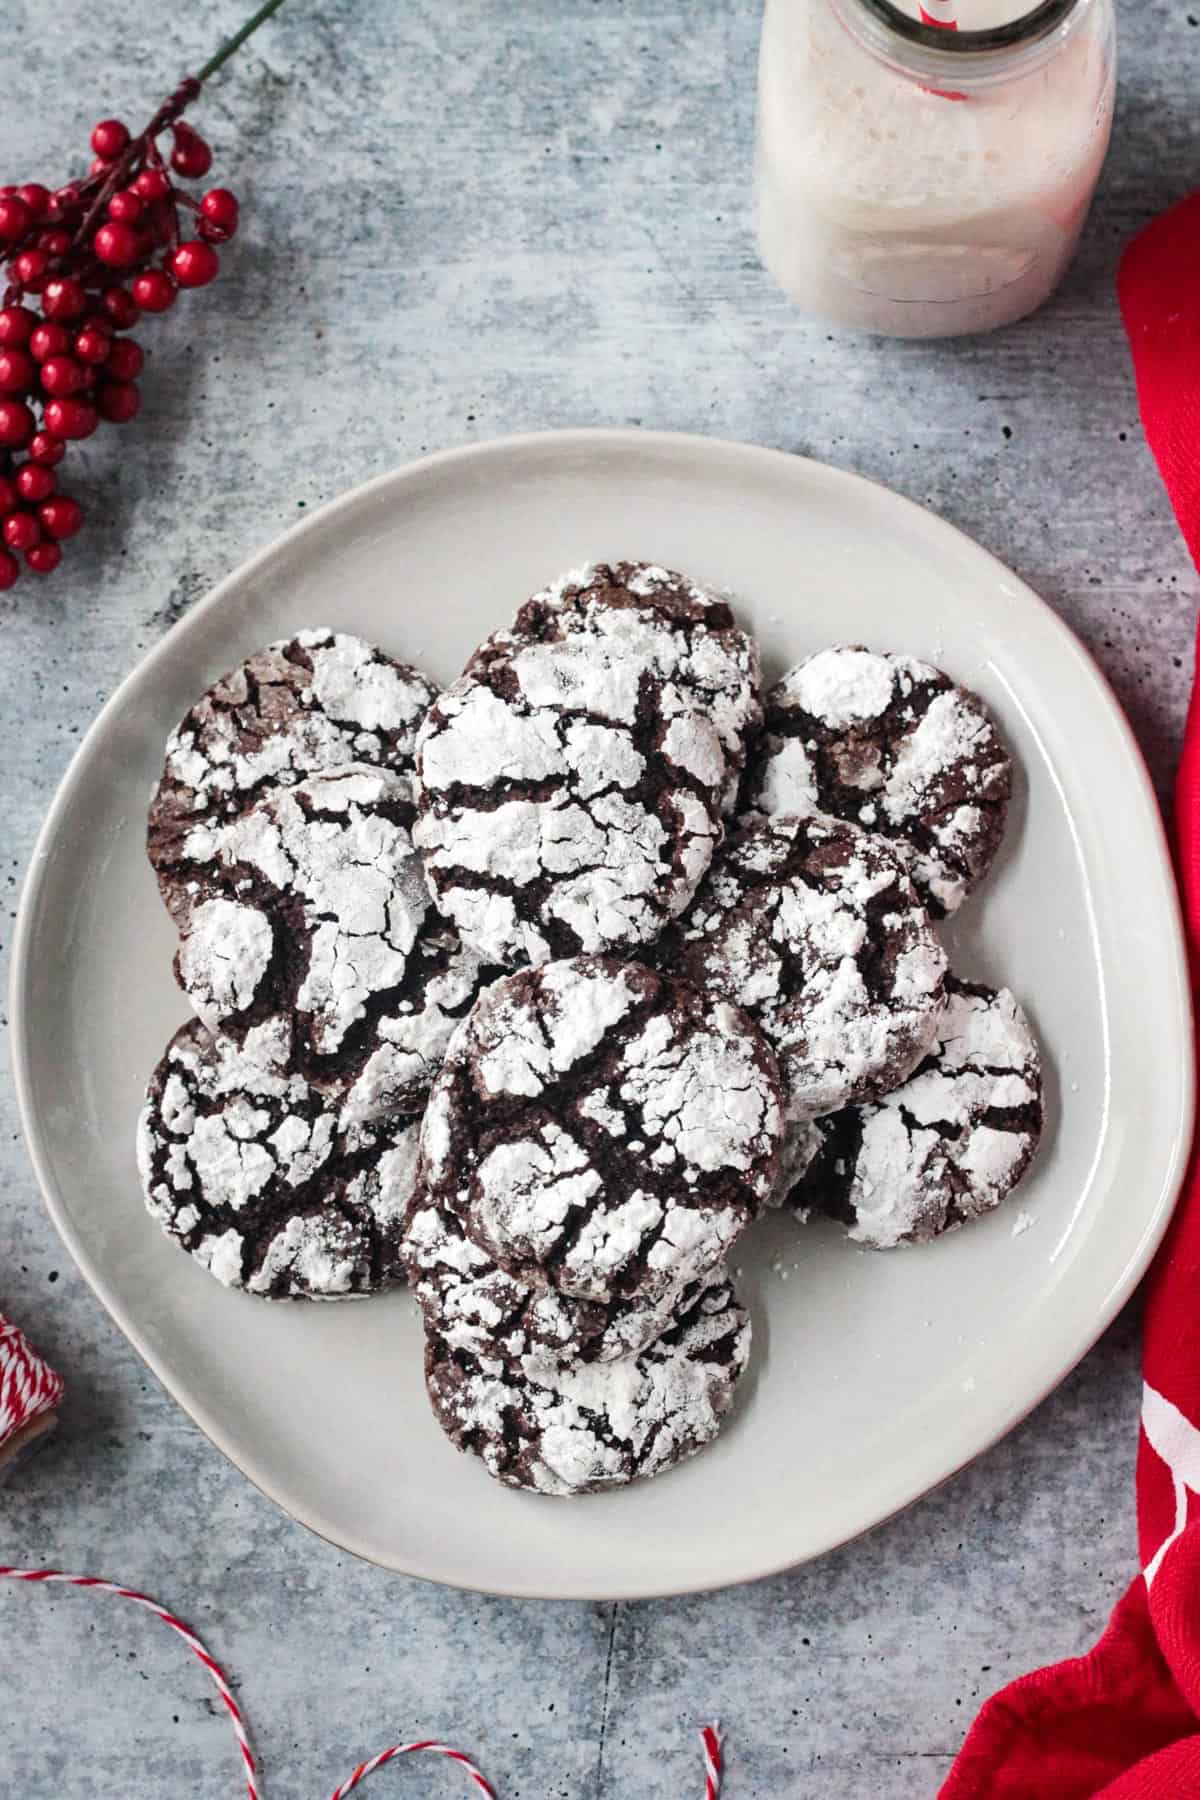 Pile of chocolate crinkle cookies dusted with powdered sugar on a plate.